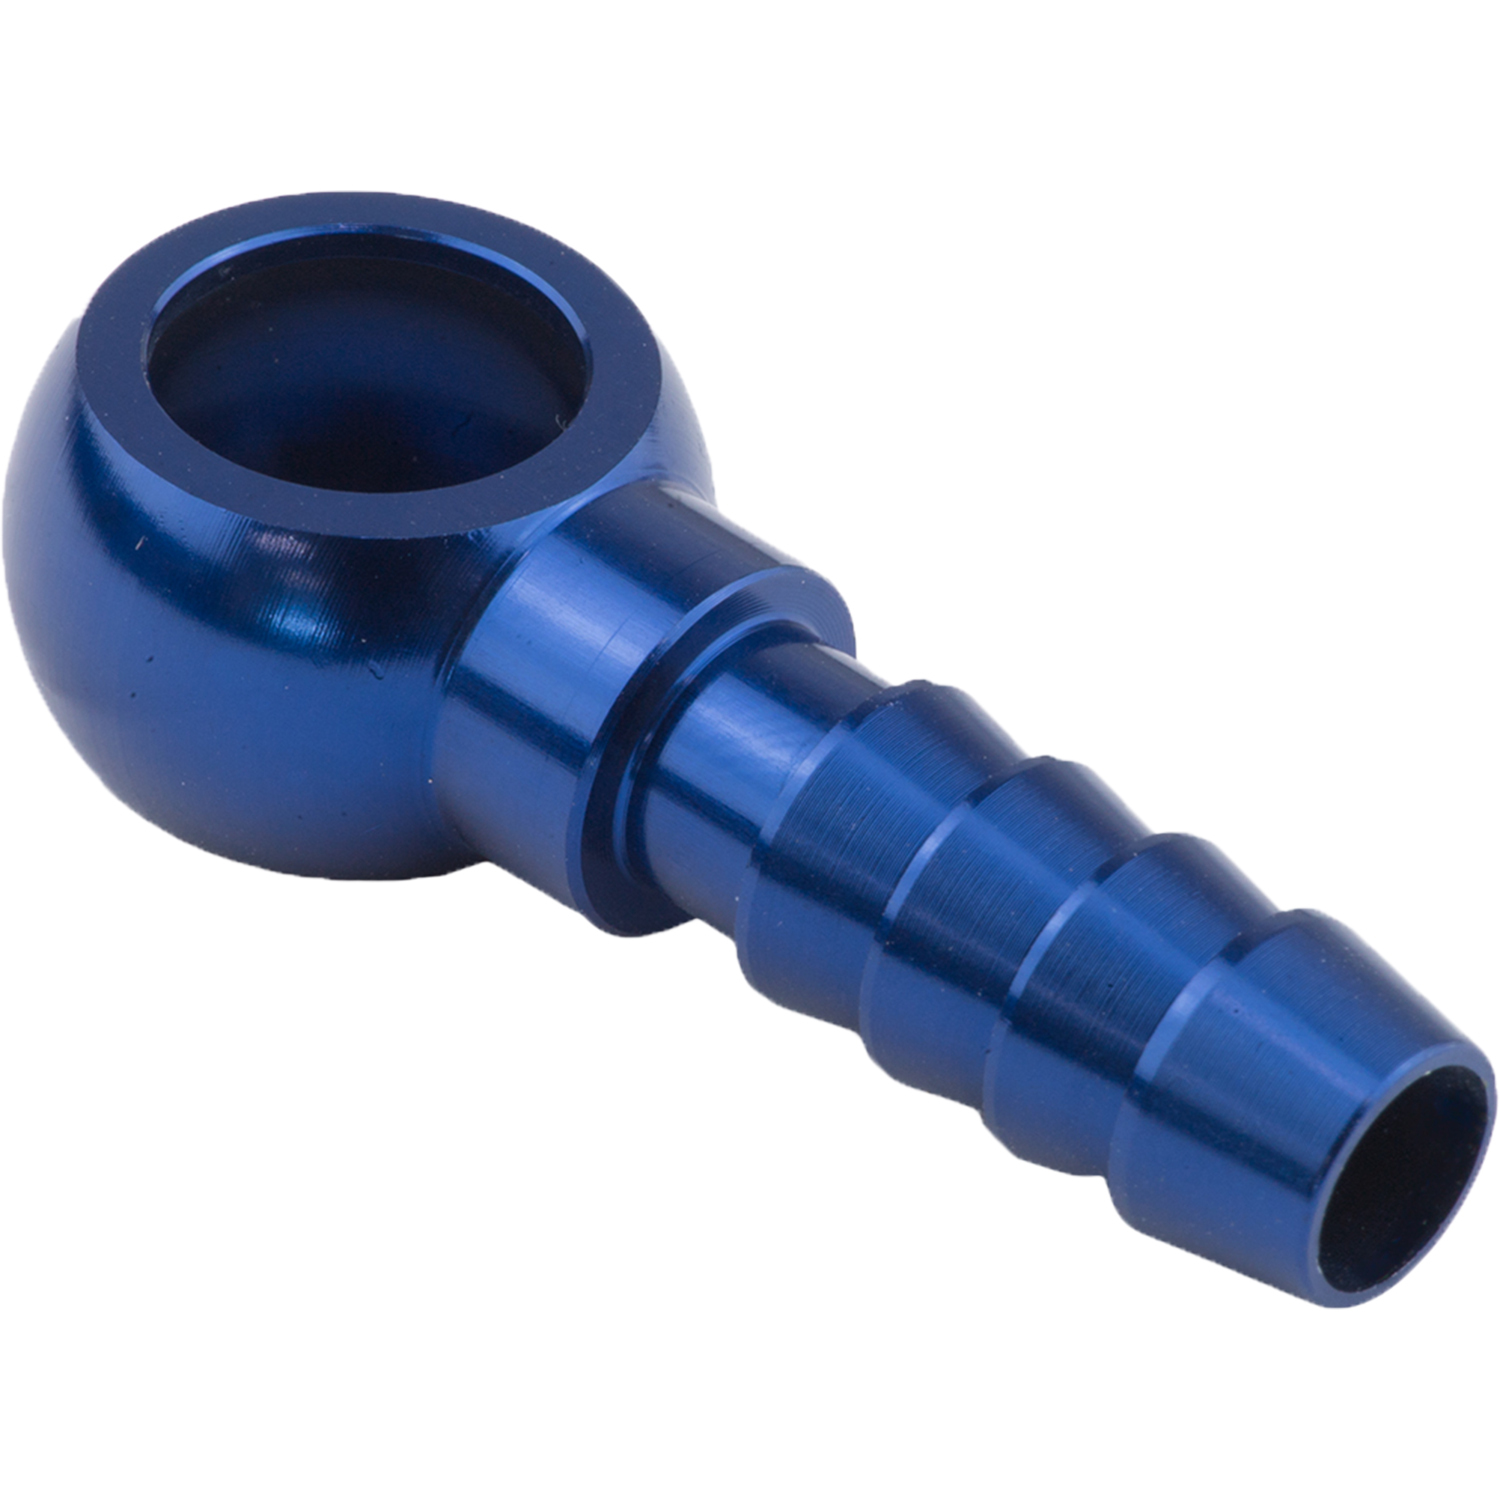 Proflow Fitting banjo 12mm To 8mm Barb, Blue